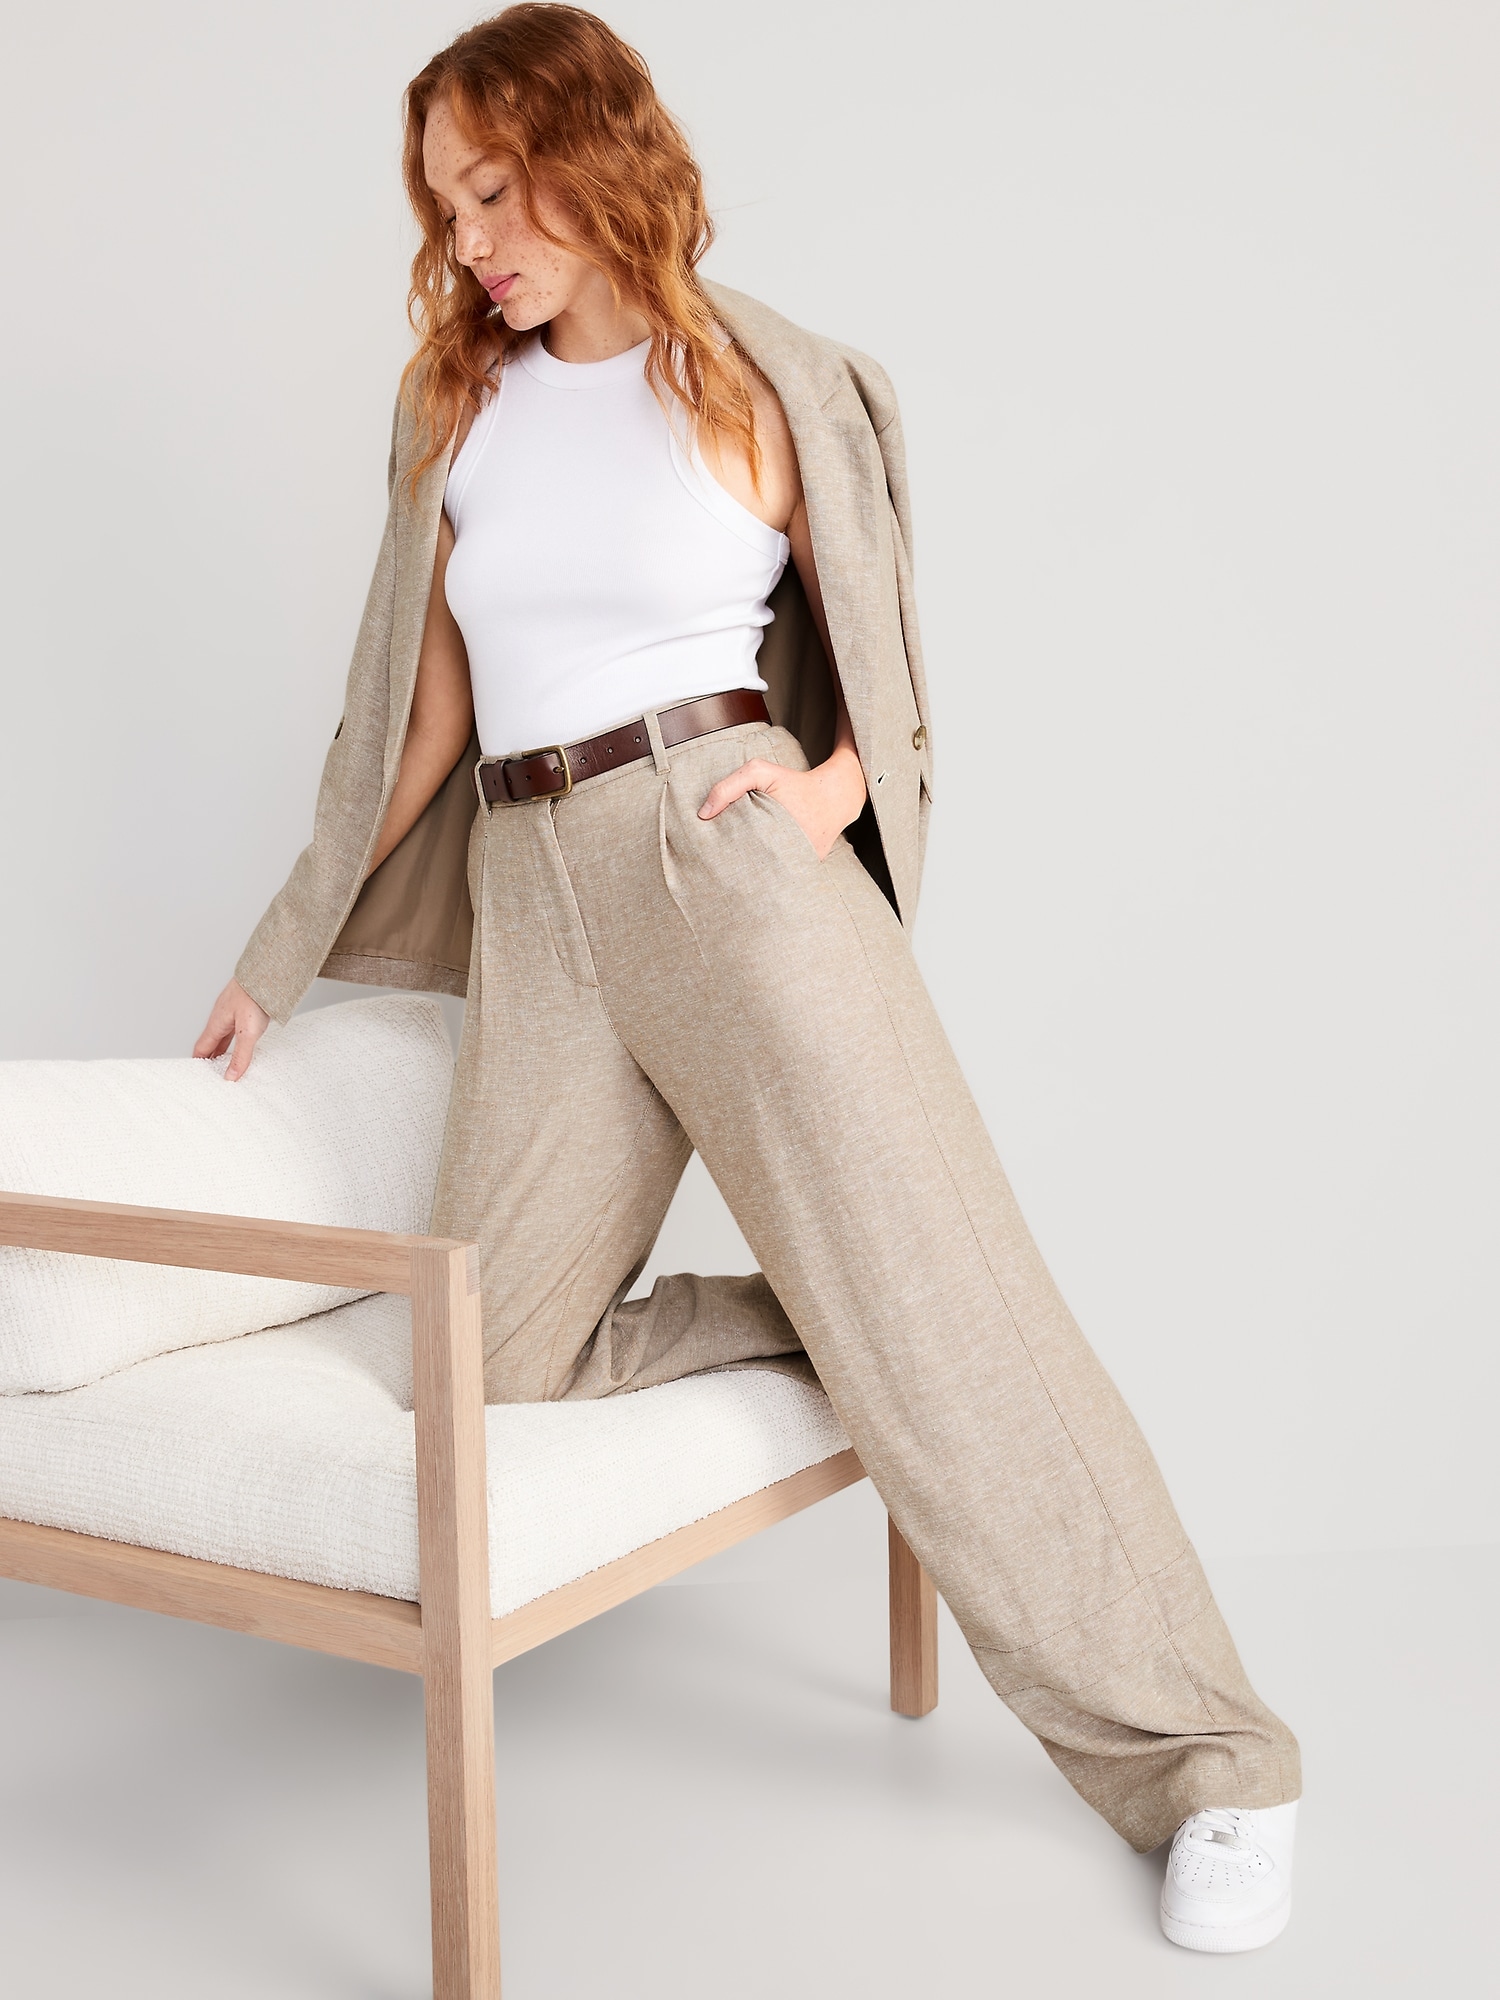 Super High Waisted Pleated Wide Leg Pant